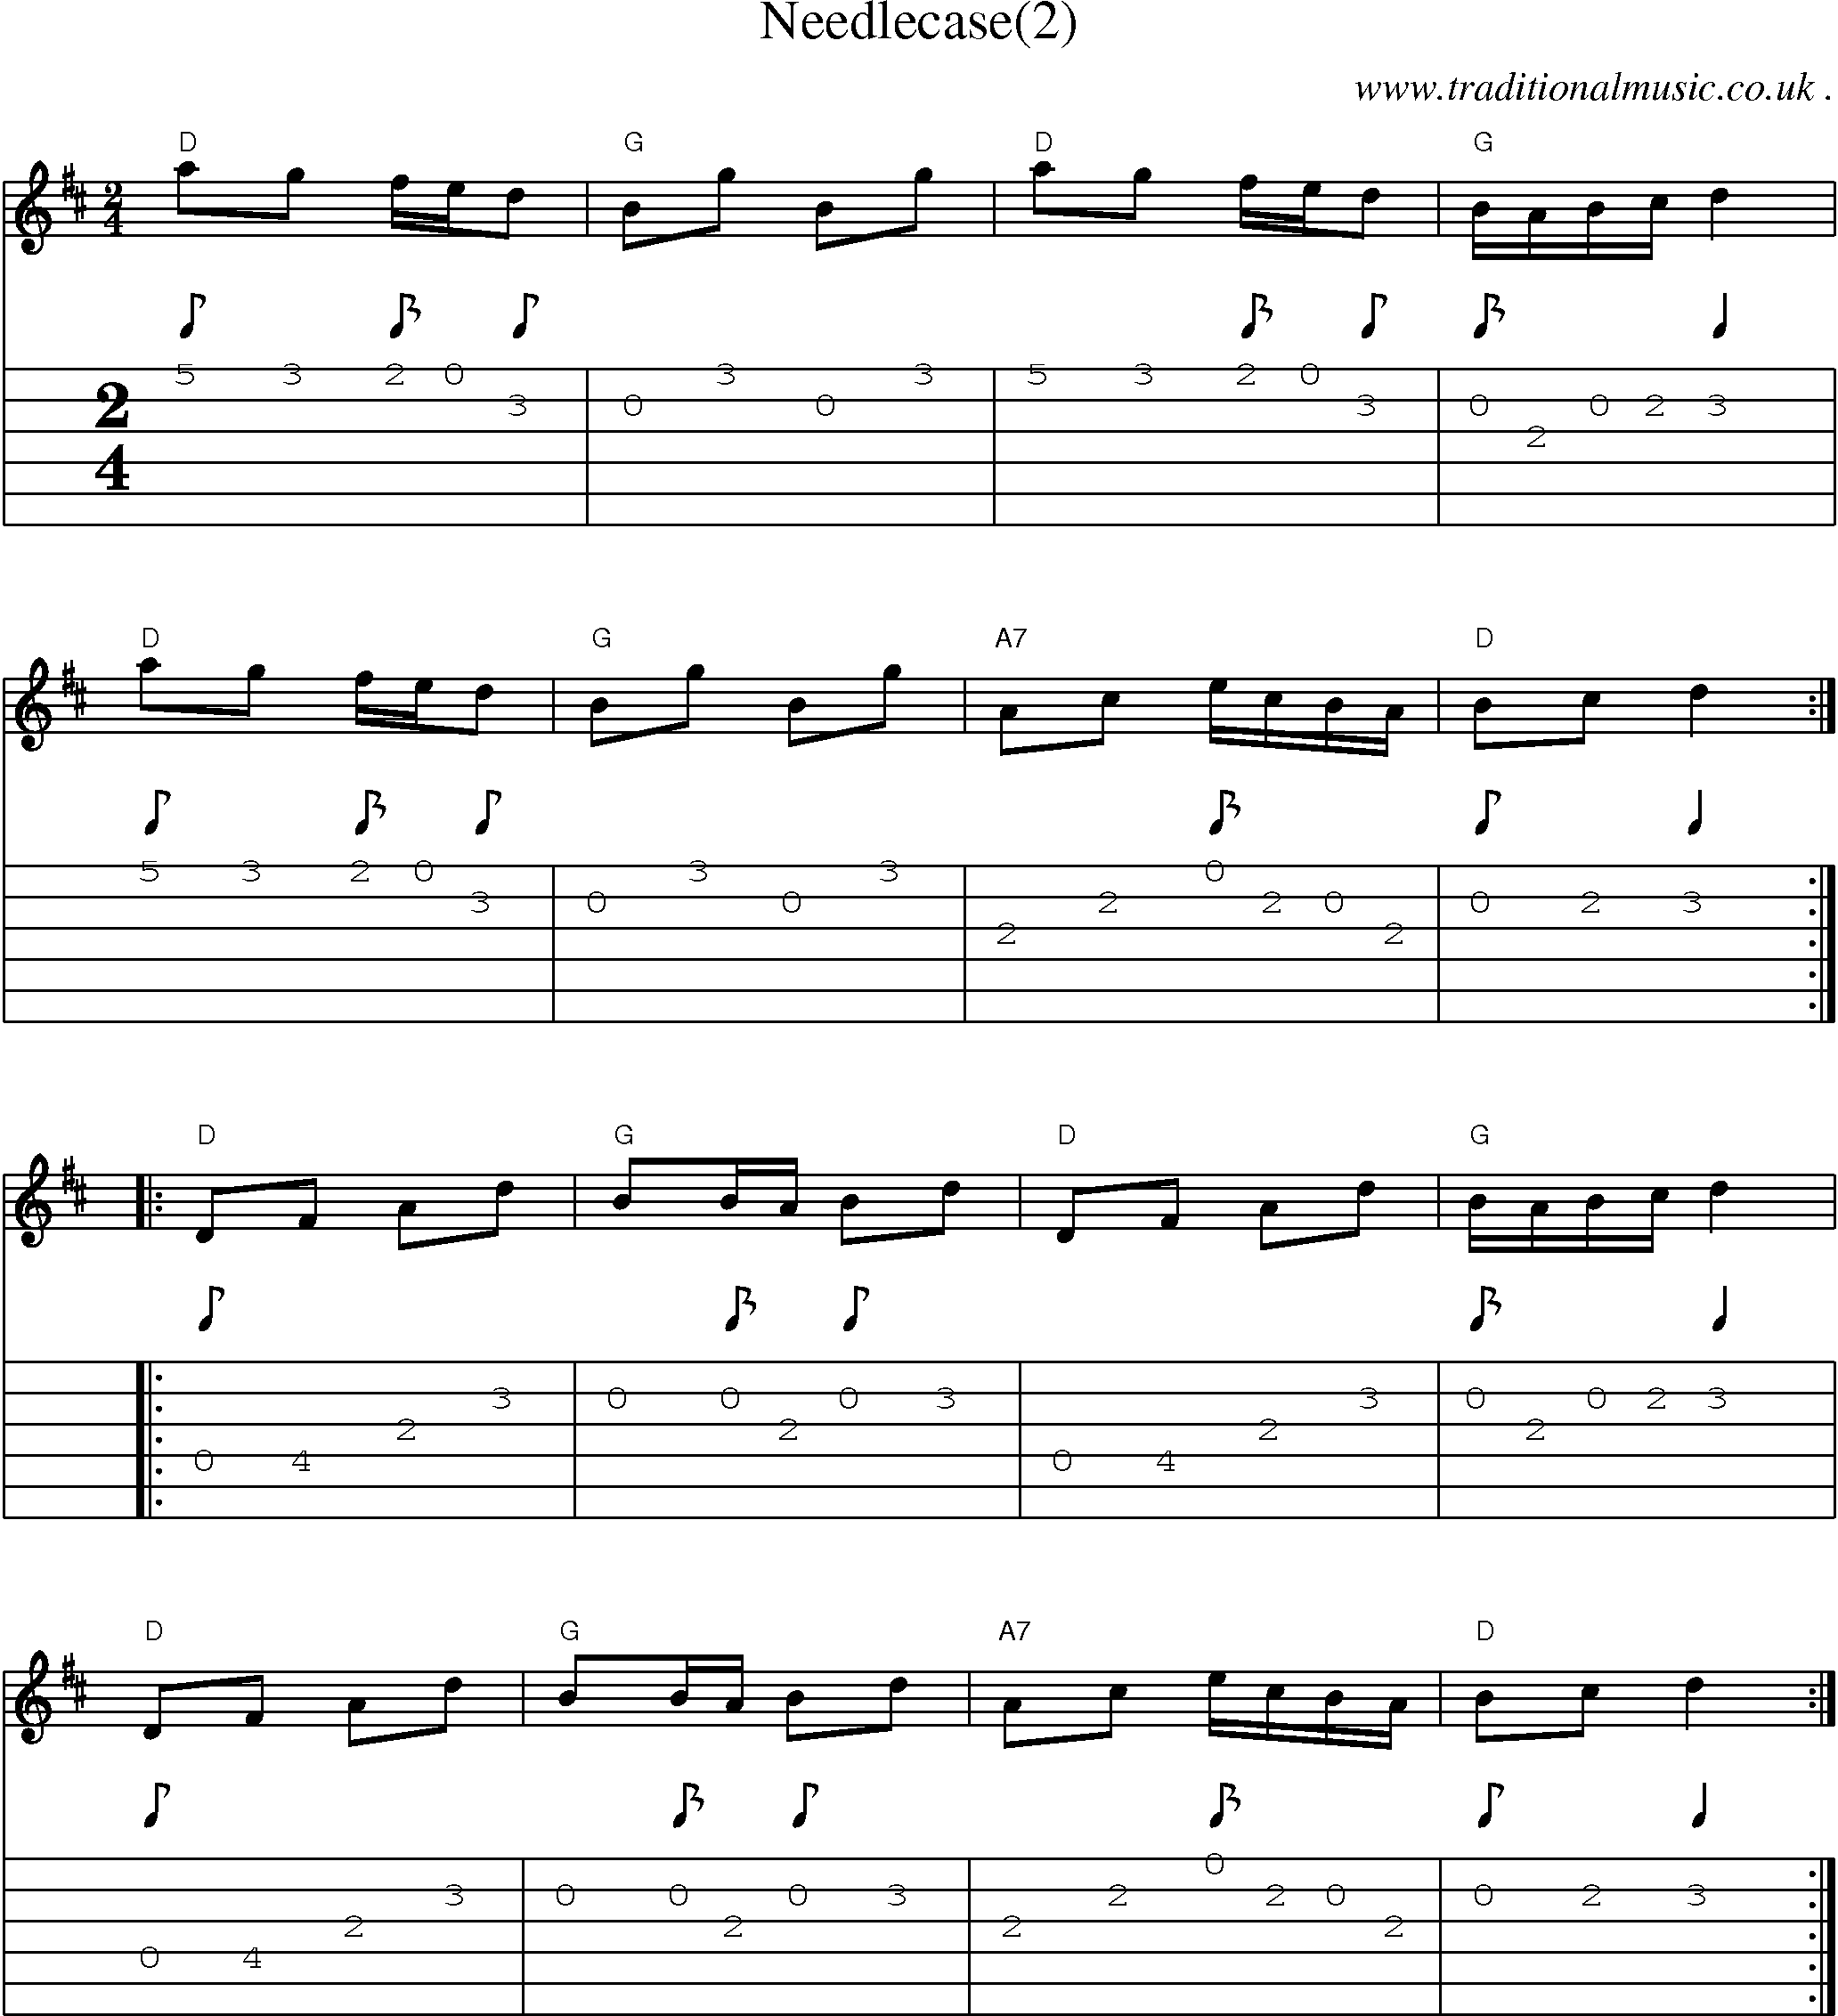 Music Score and Guitar Tabs for Needlecase(2)